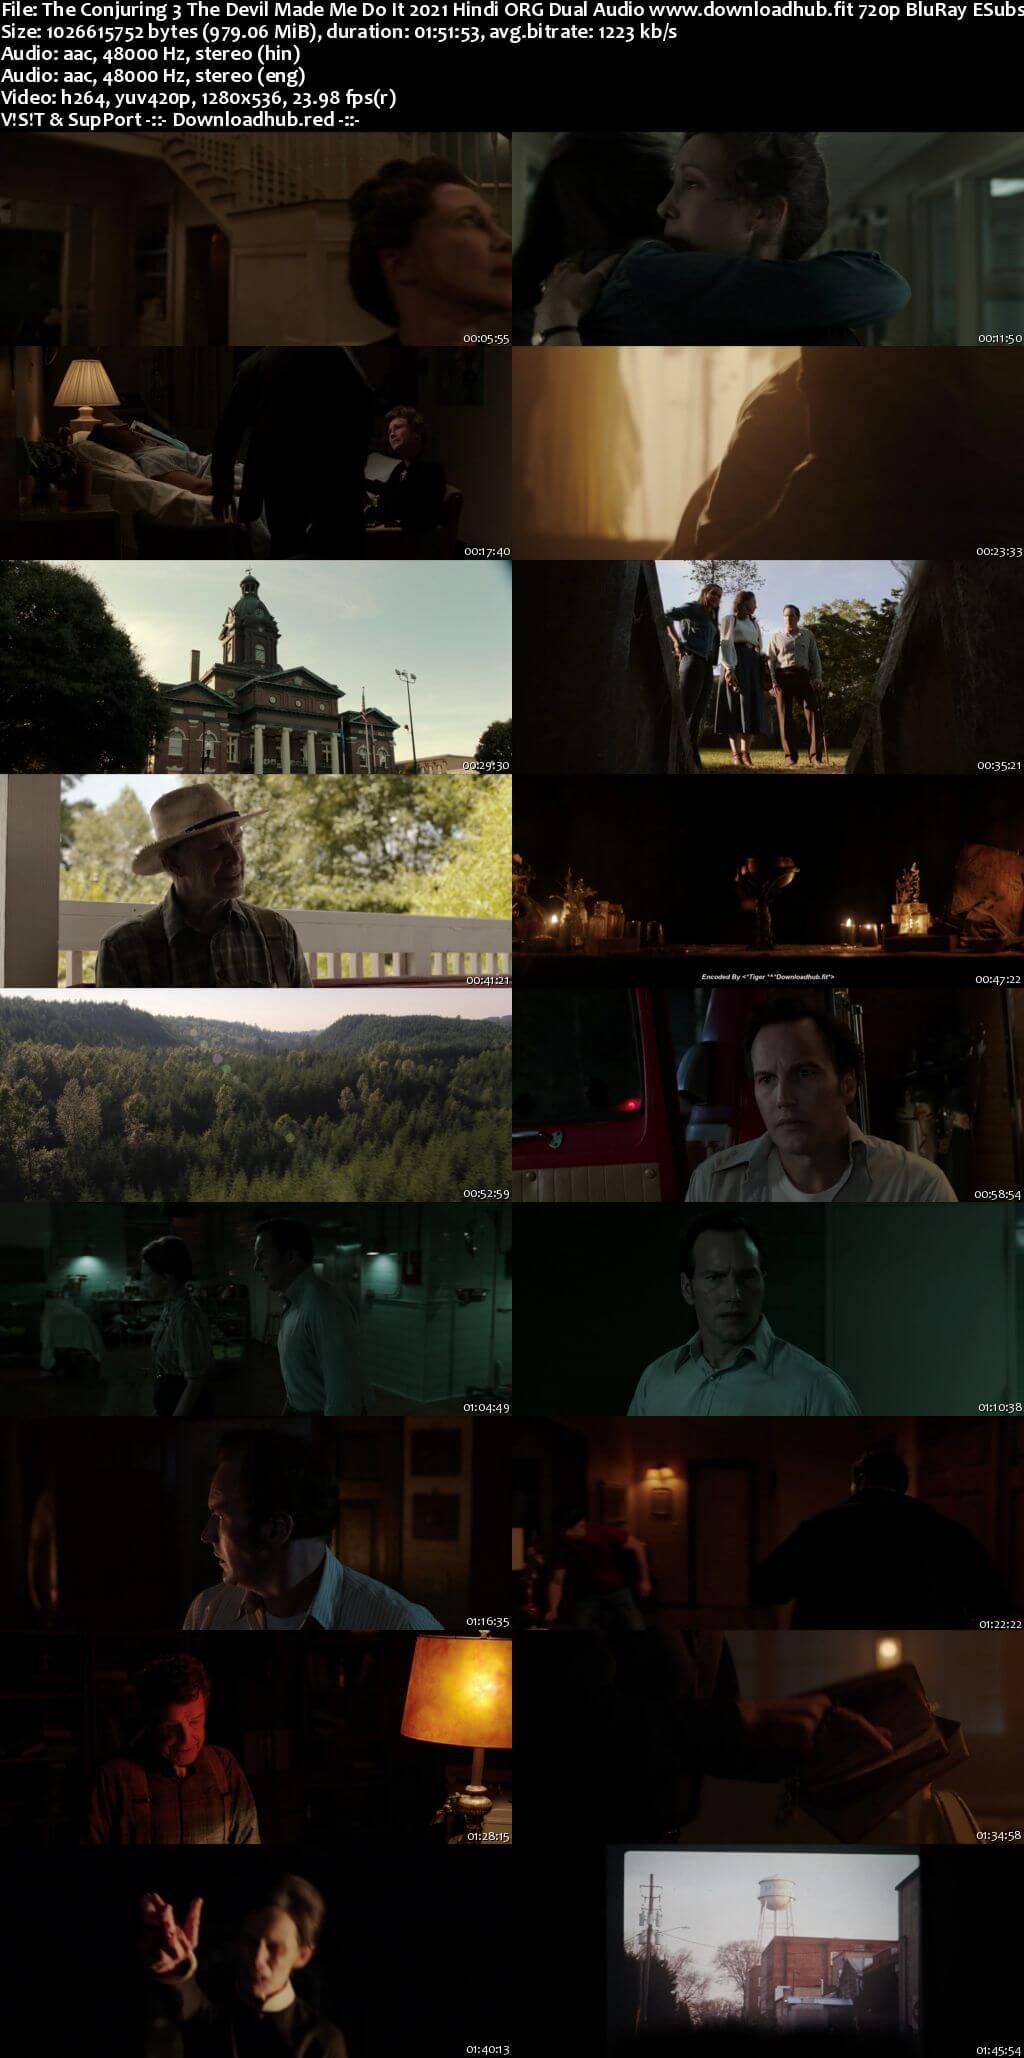 The Conjuring 3 The Devil Made Me Do It 2021 Hindi ORG Dual Audio 720p BluRay ESubs